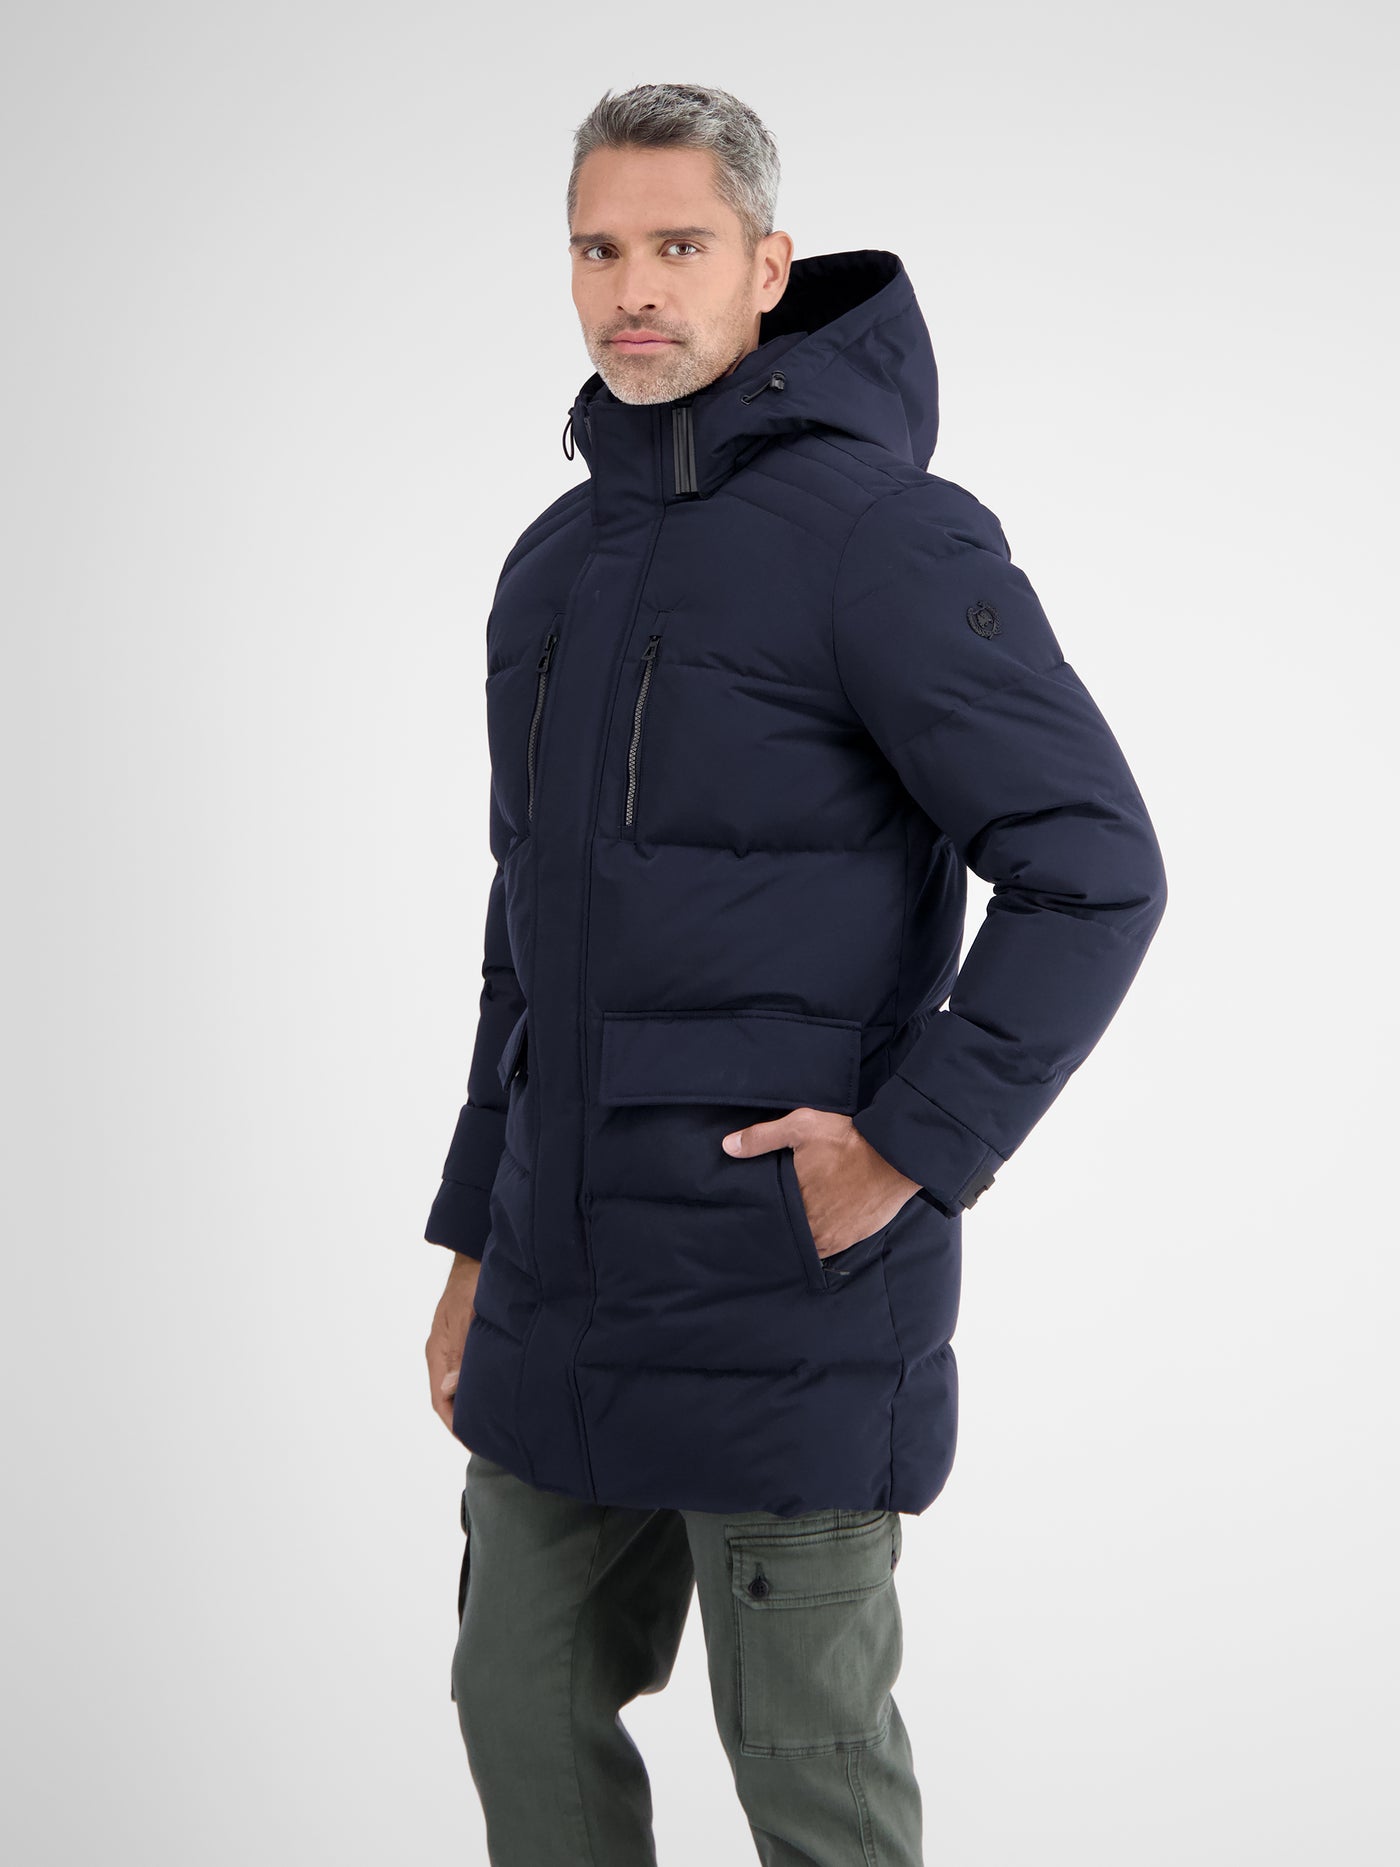 Long jacket in parka design. quilted